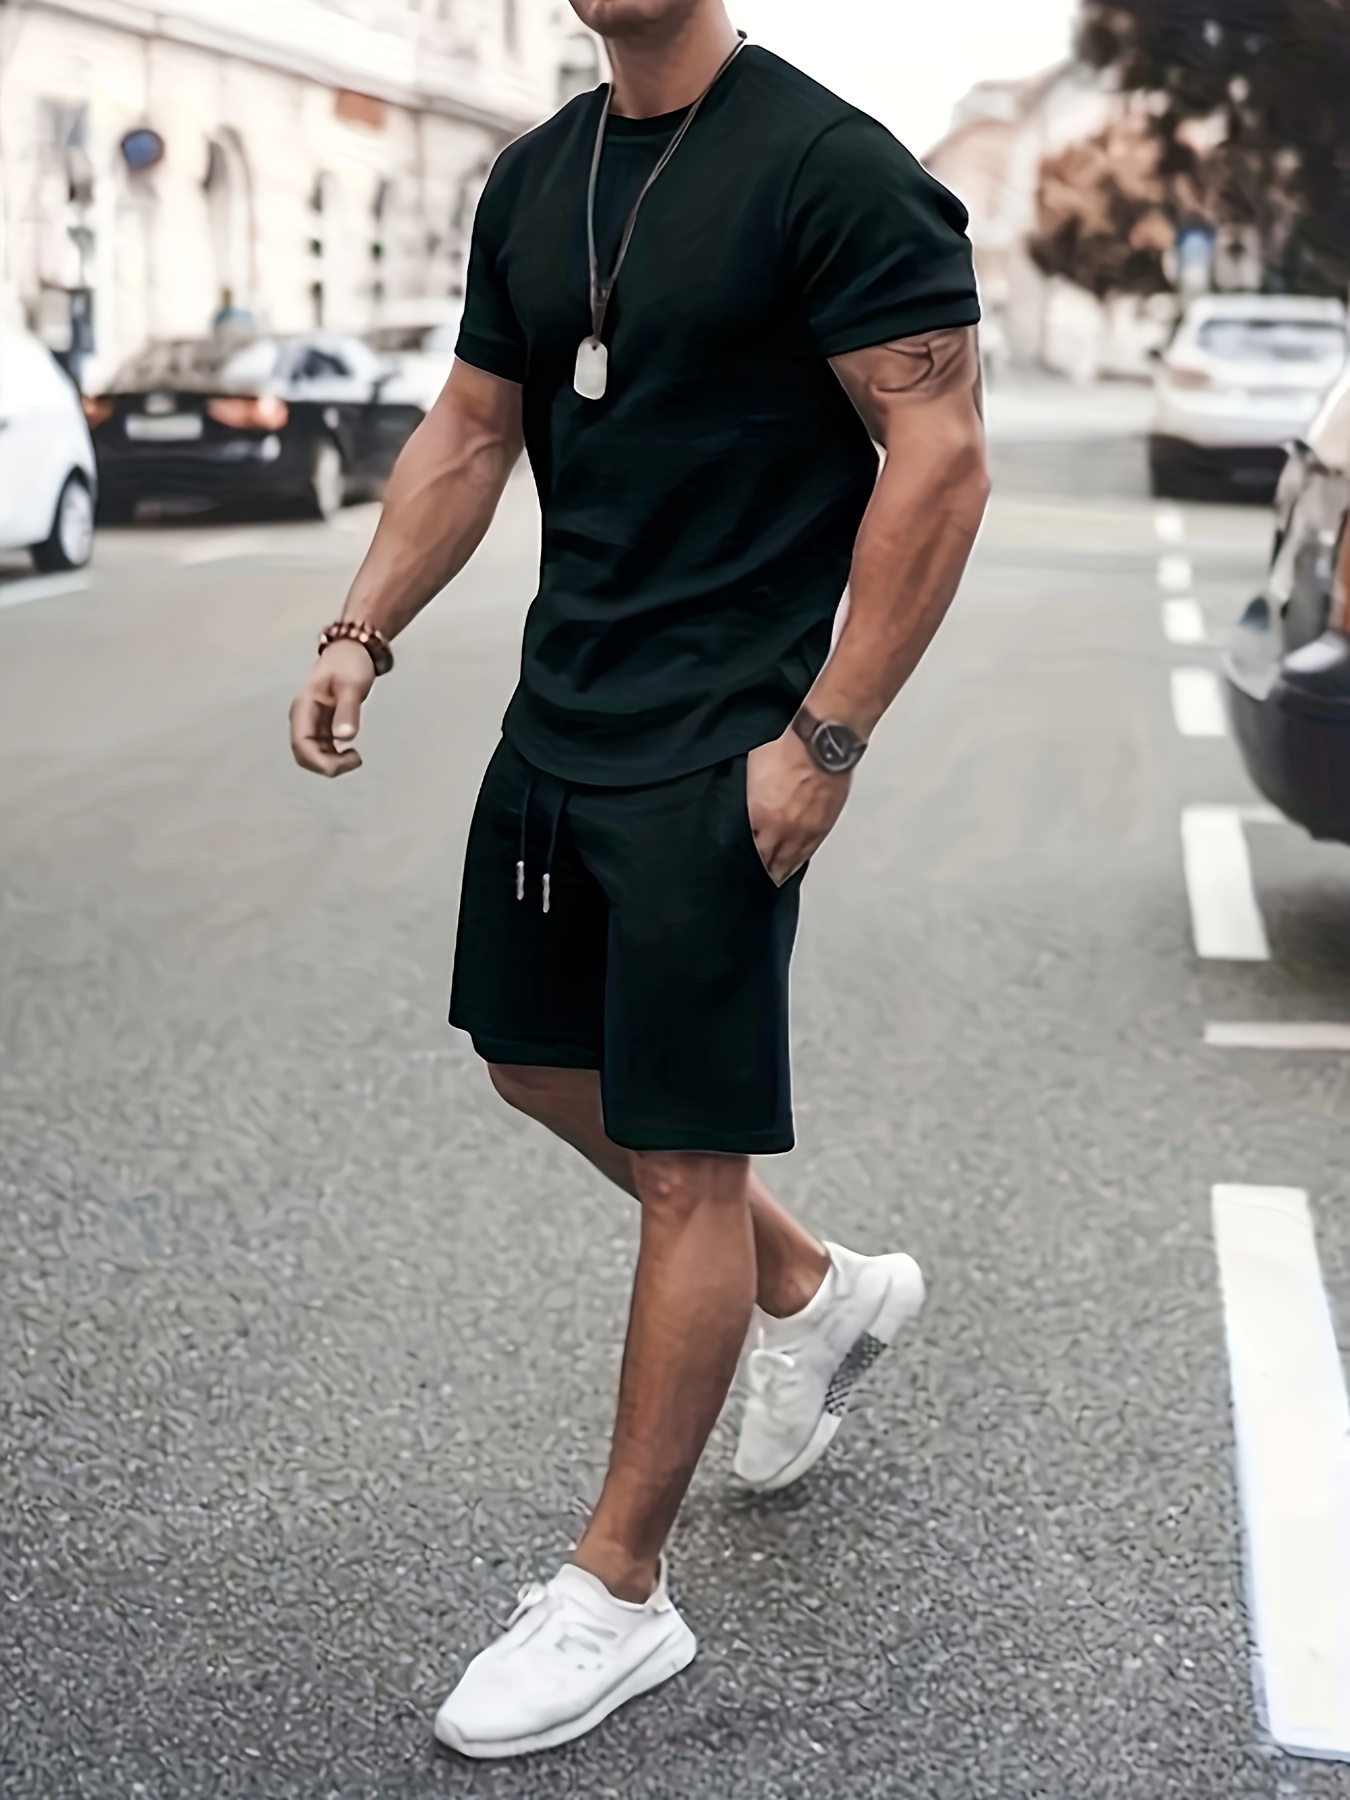  Undershirts for Men Pack V Neck Men's Collared Solid Color  Tracksuits Short Sleeve Pinstripe Printed Outfits Summer Workout T-Shirts  Shorts Set Hooded Fishing Shirts for Men Black : Sports & Outdoors